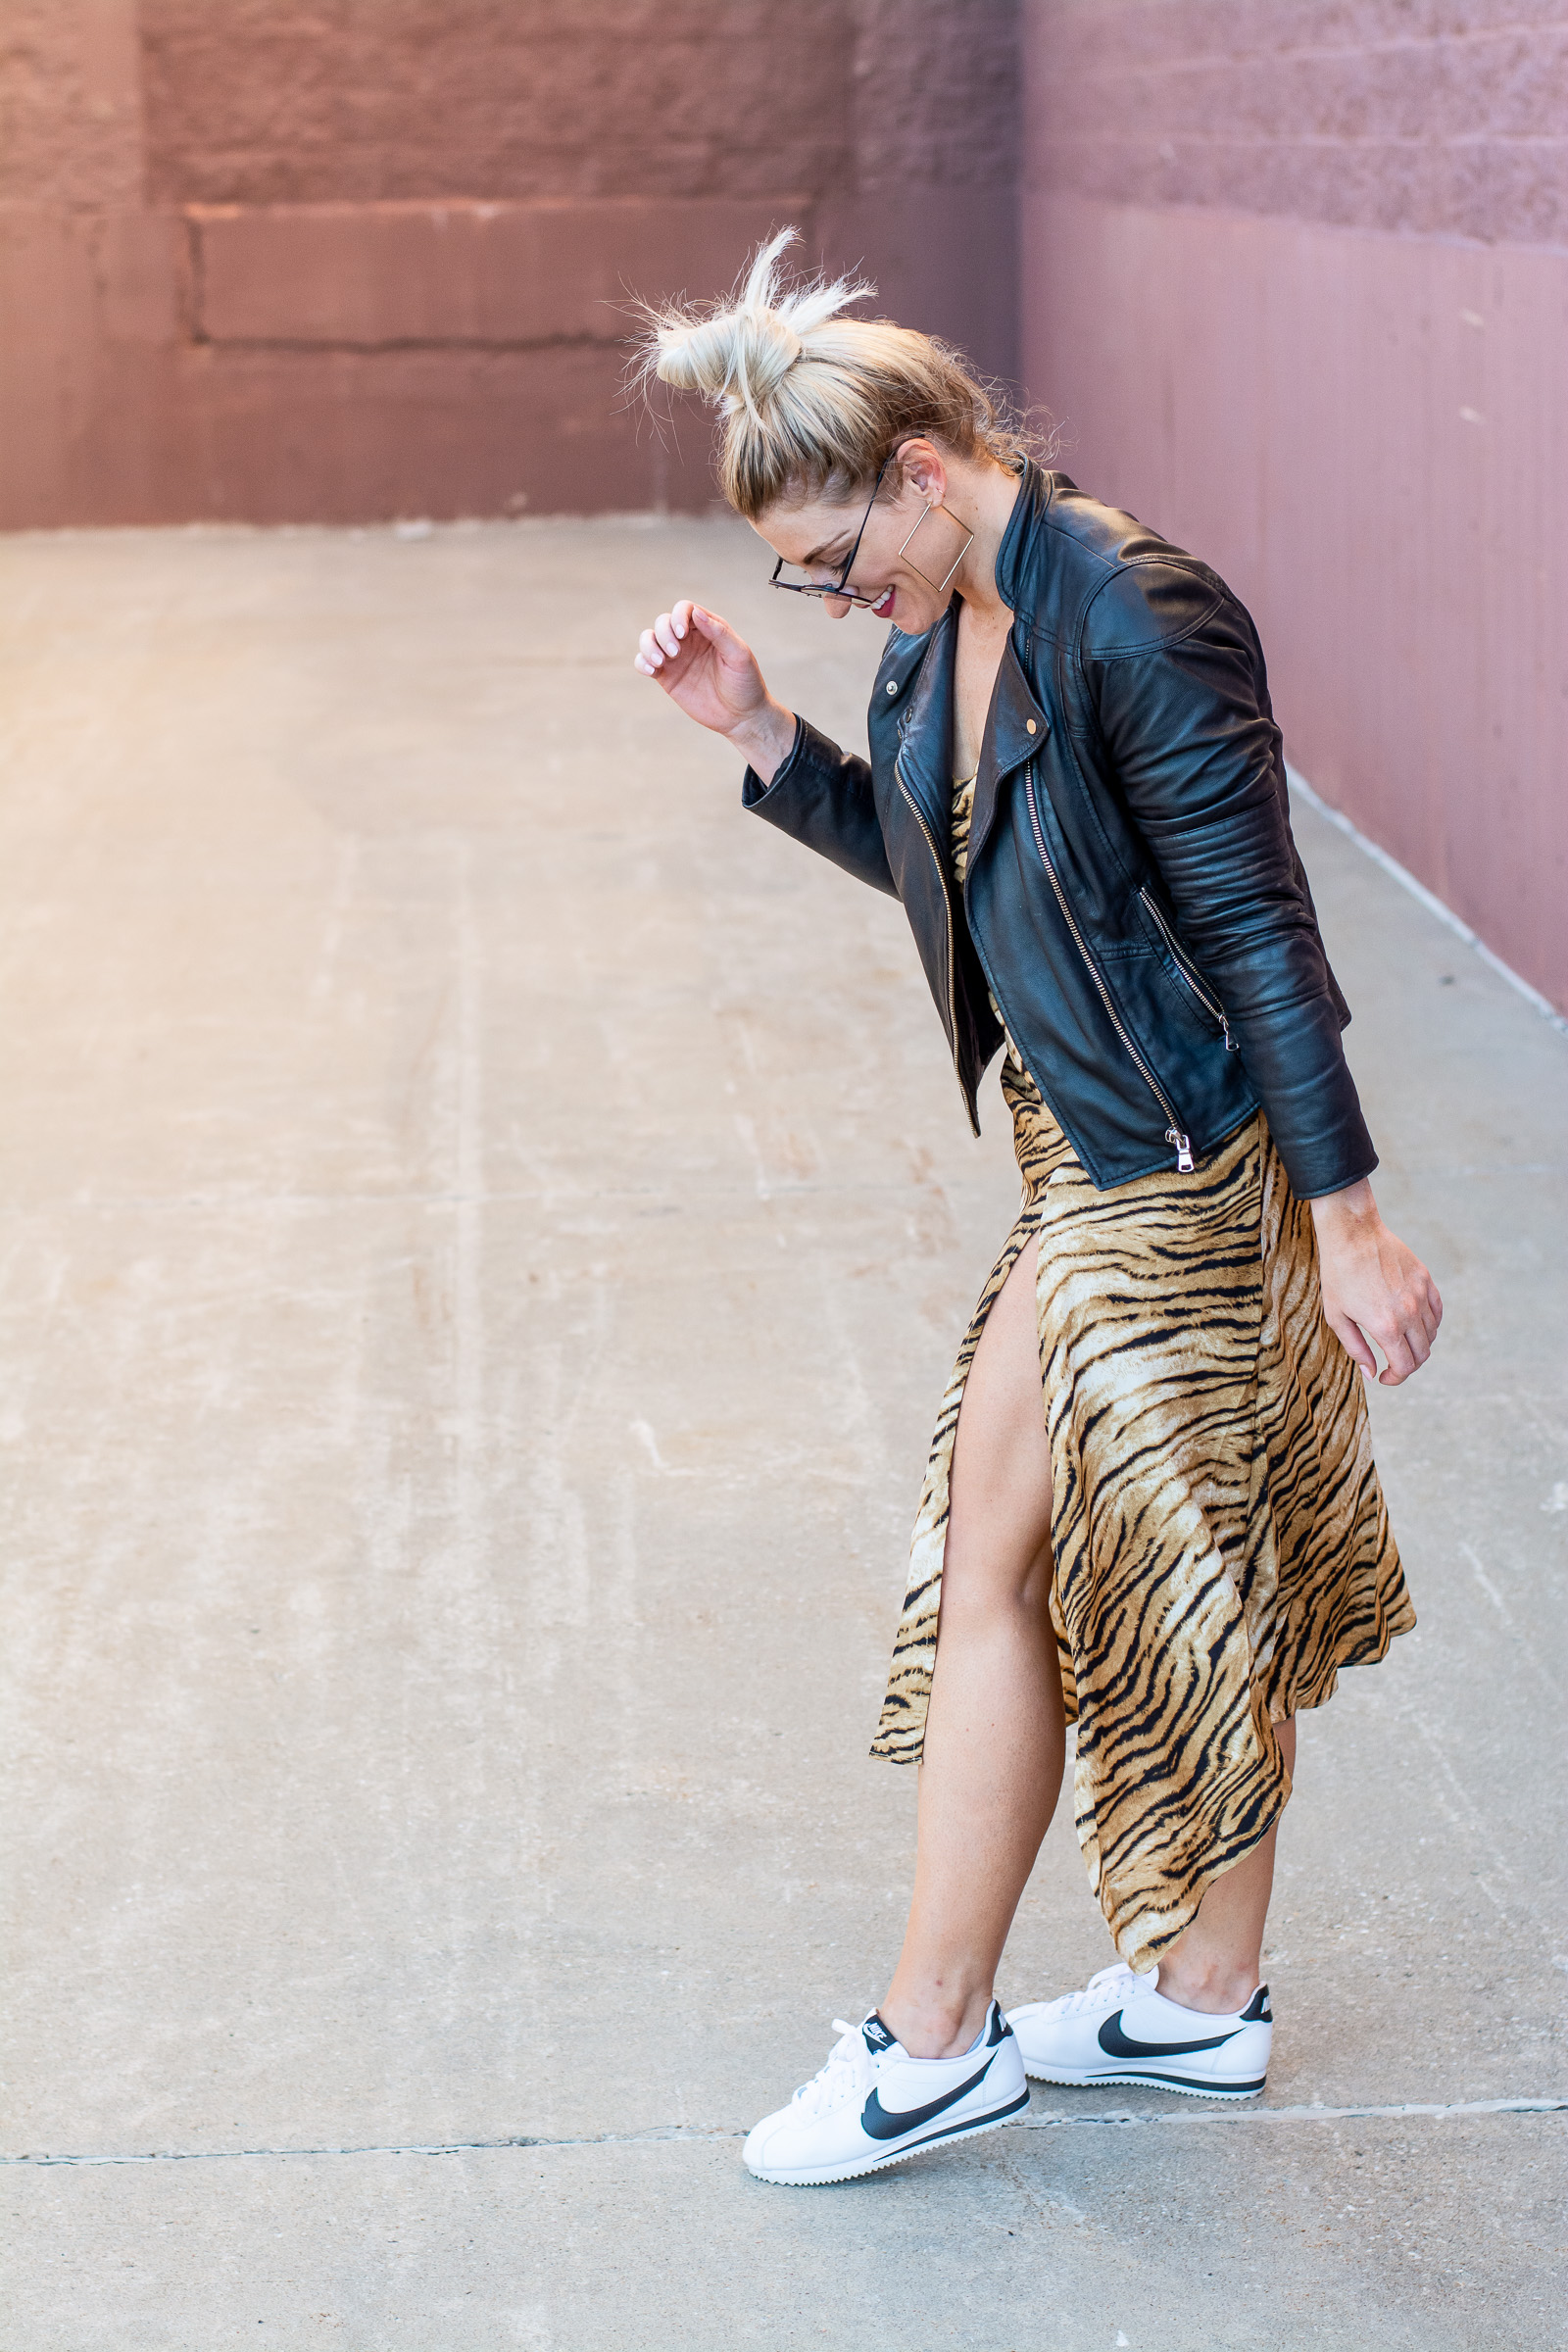 Summer-to-Fall Transition Outfit: Slip Dress and a Leather Jacket. | LSR